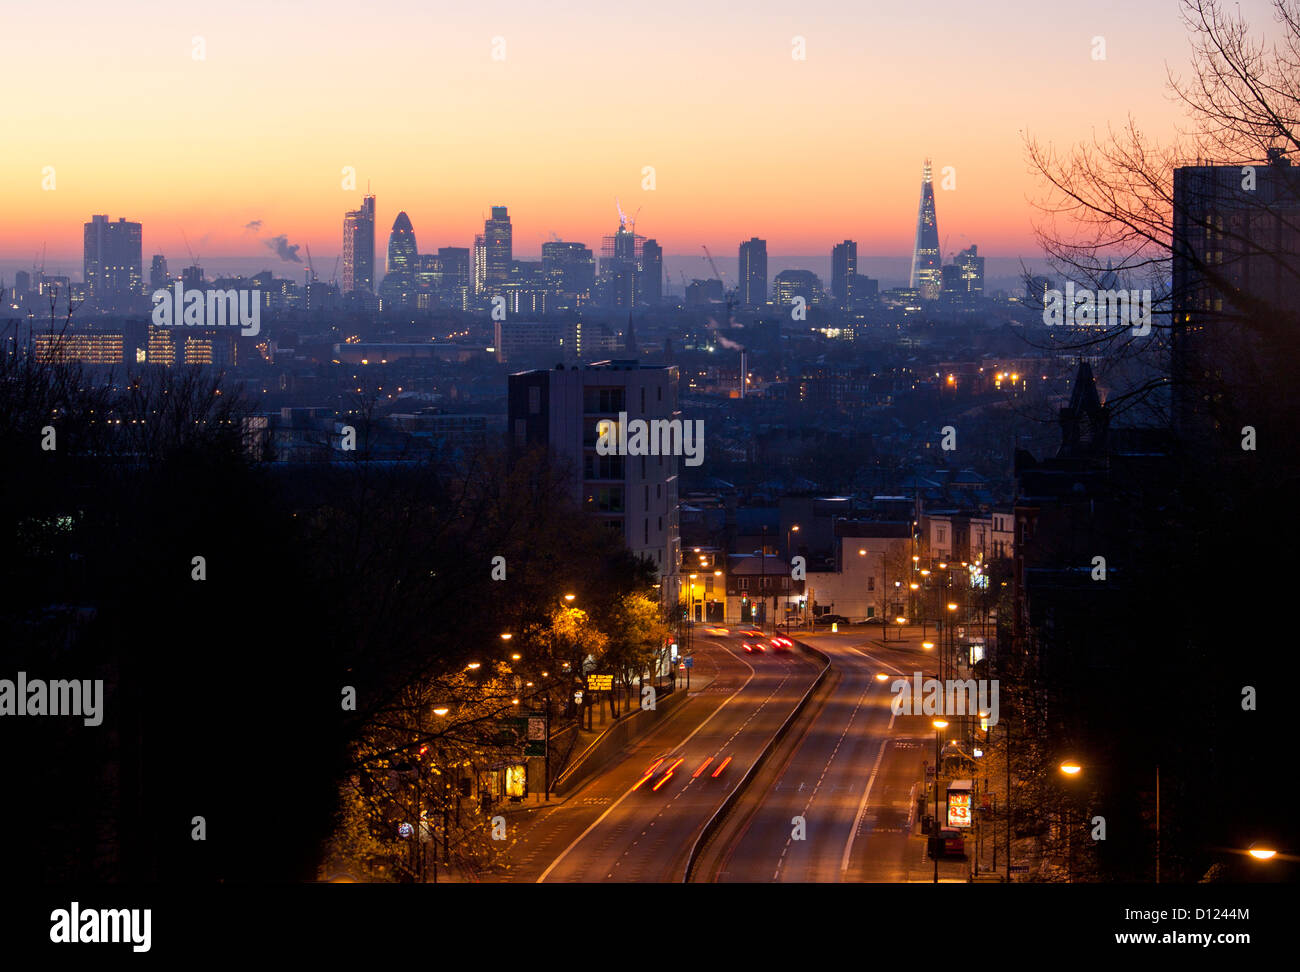 London city skyline from Archway bridge at dawn Archway Road in foreground London England UK Stock Photo